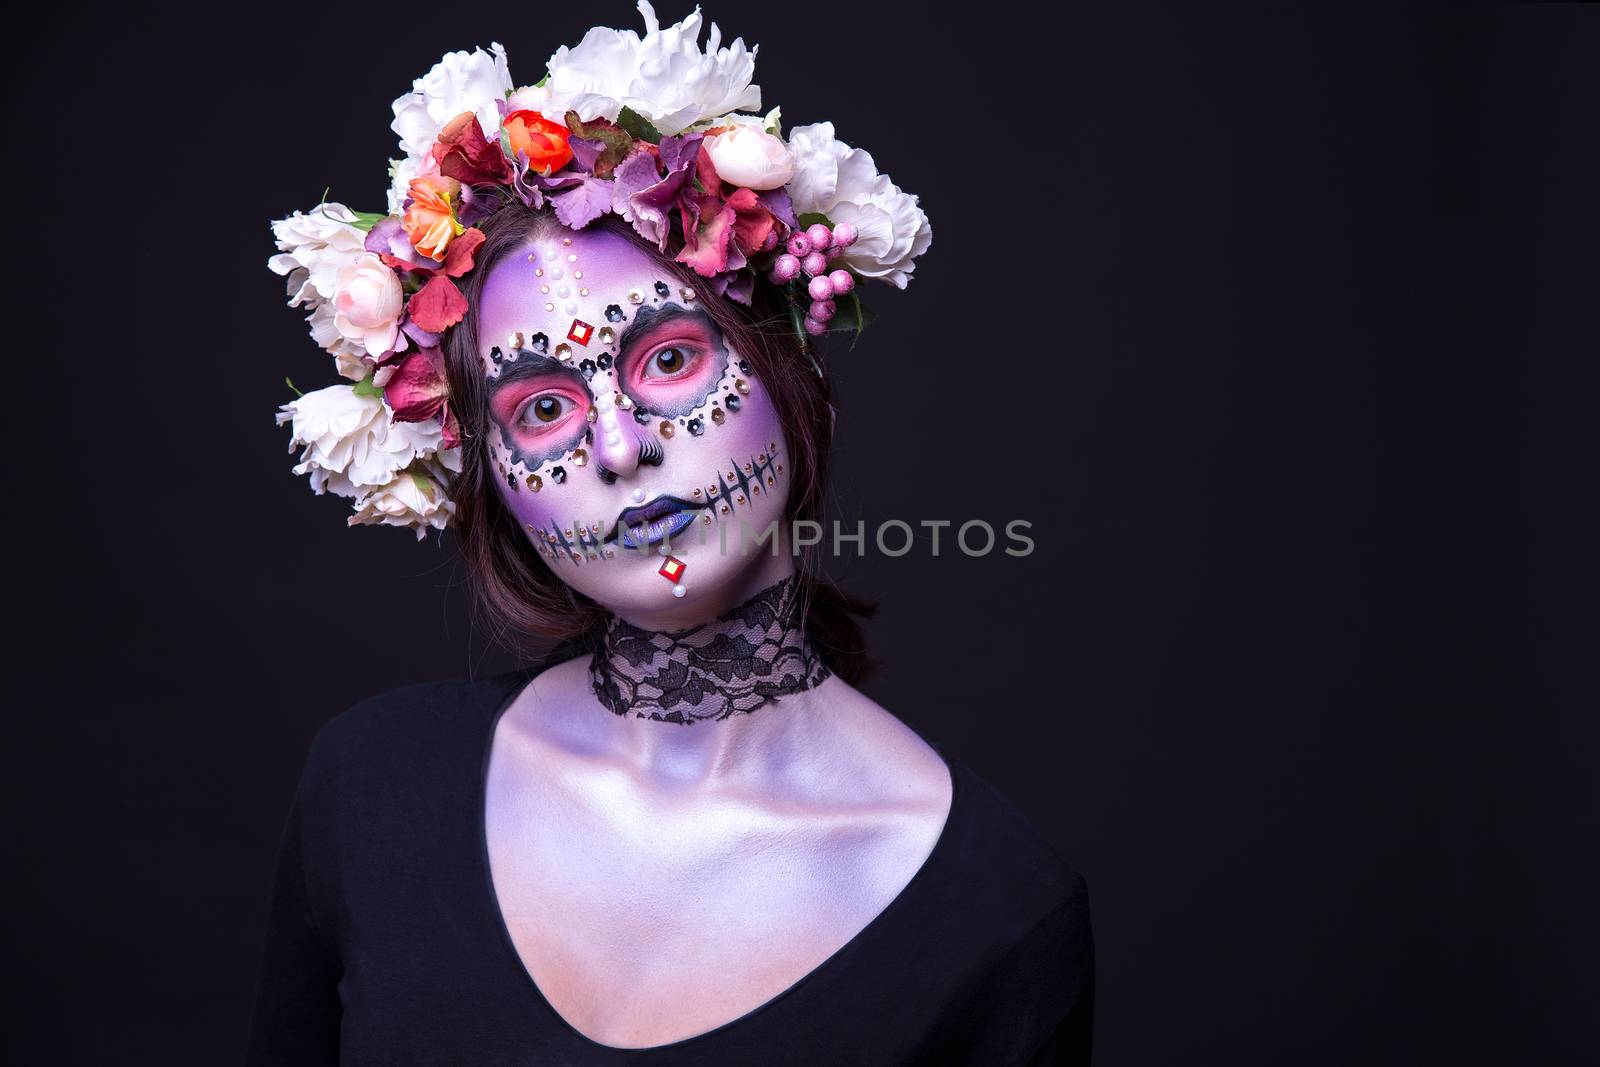 Halloween Makeup with Rhinestones and Wreath of Flowers by Multipedia